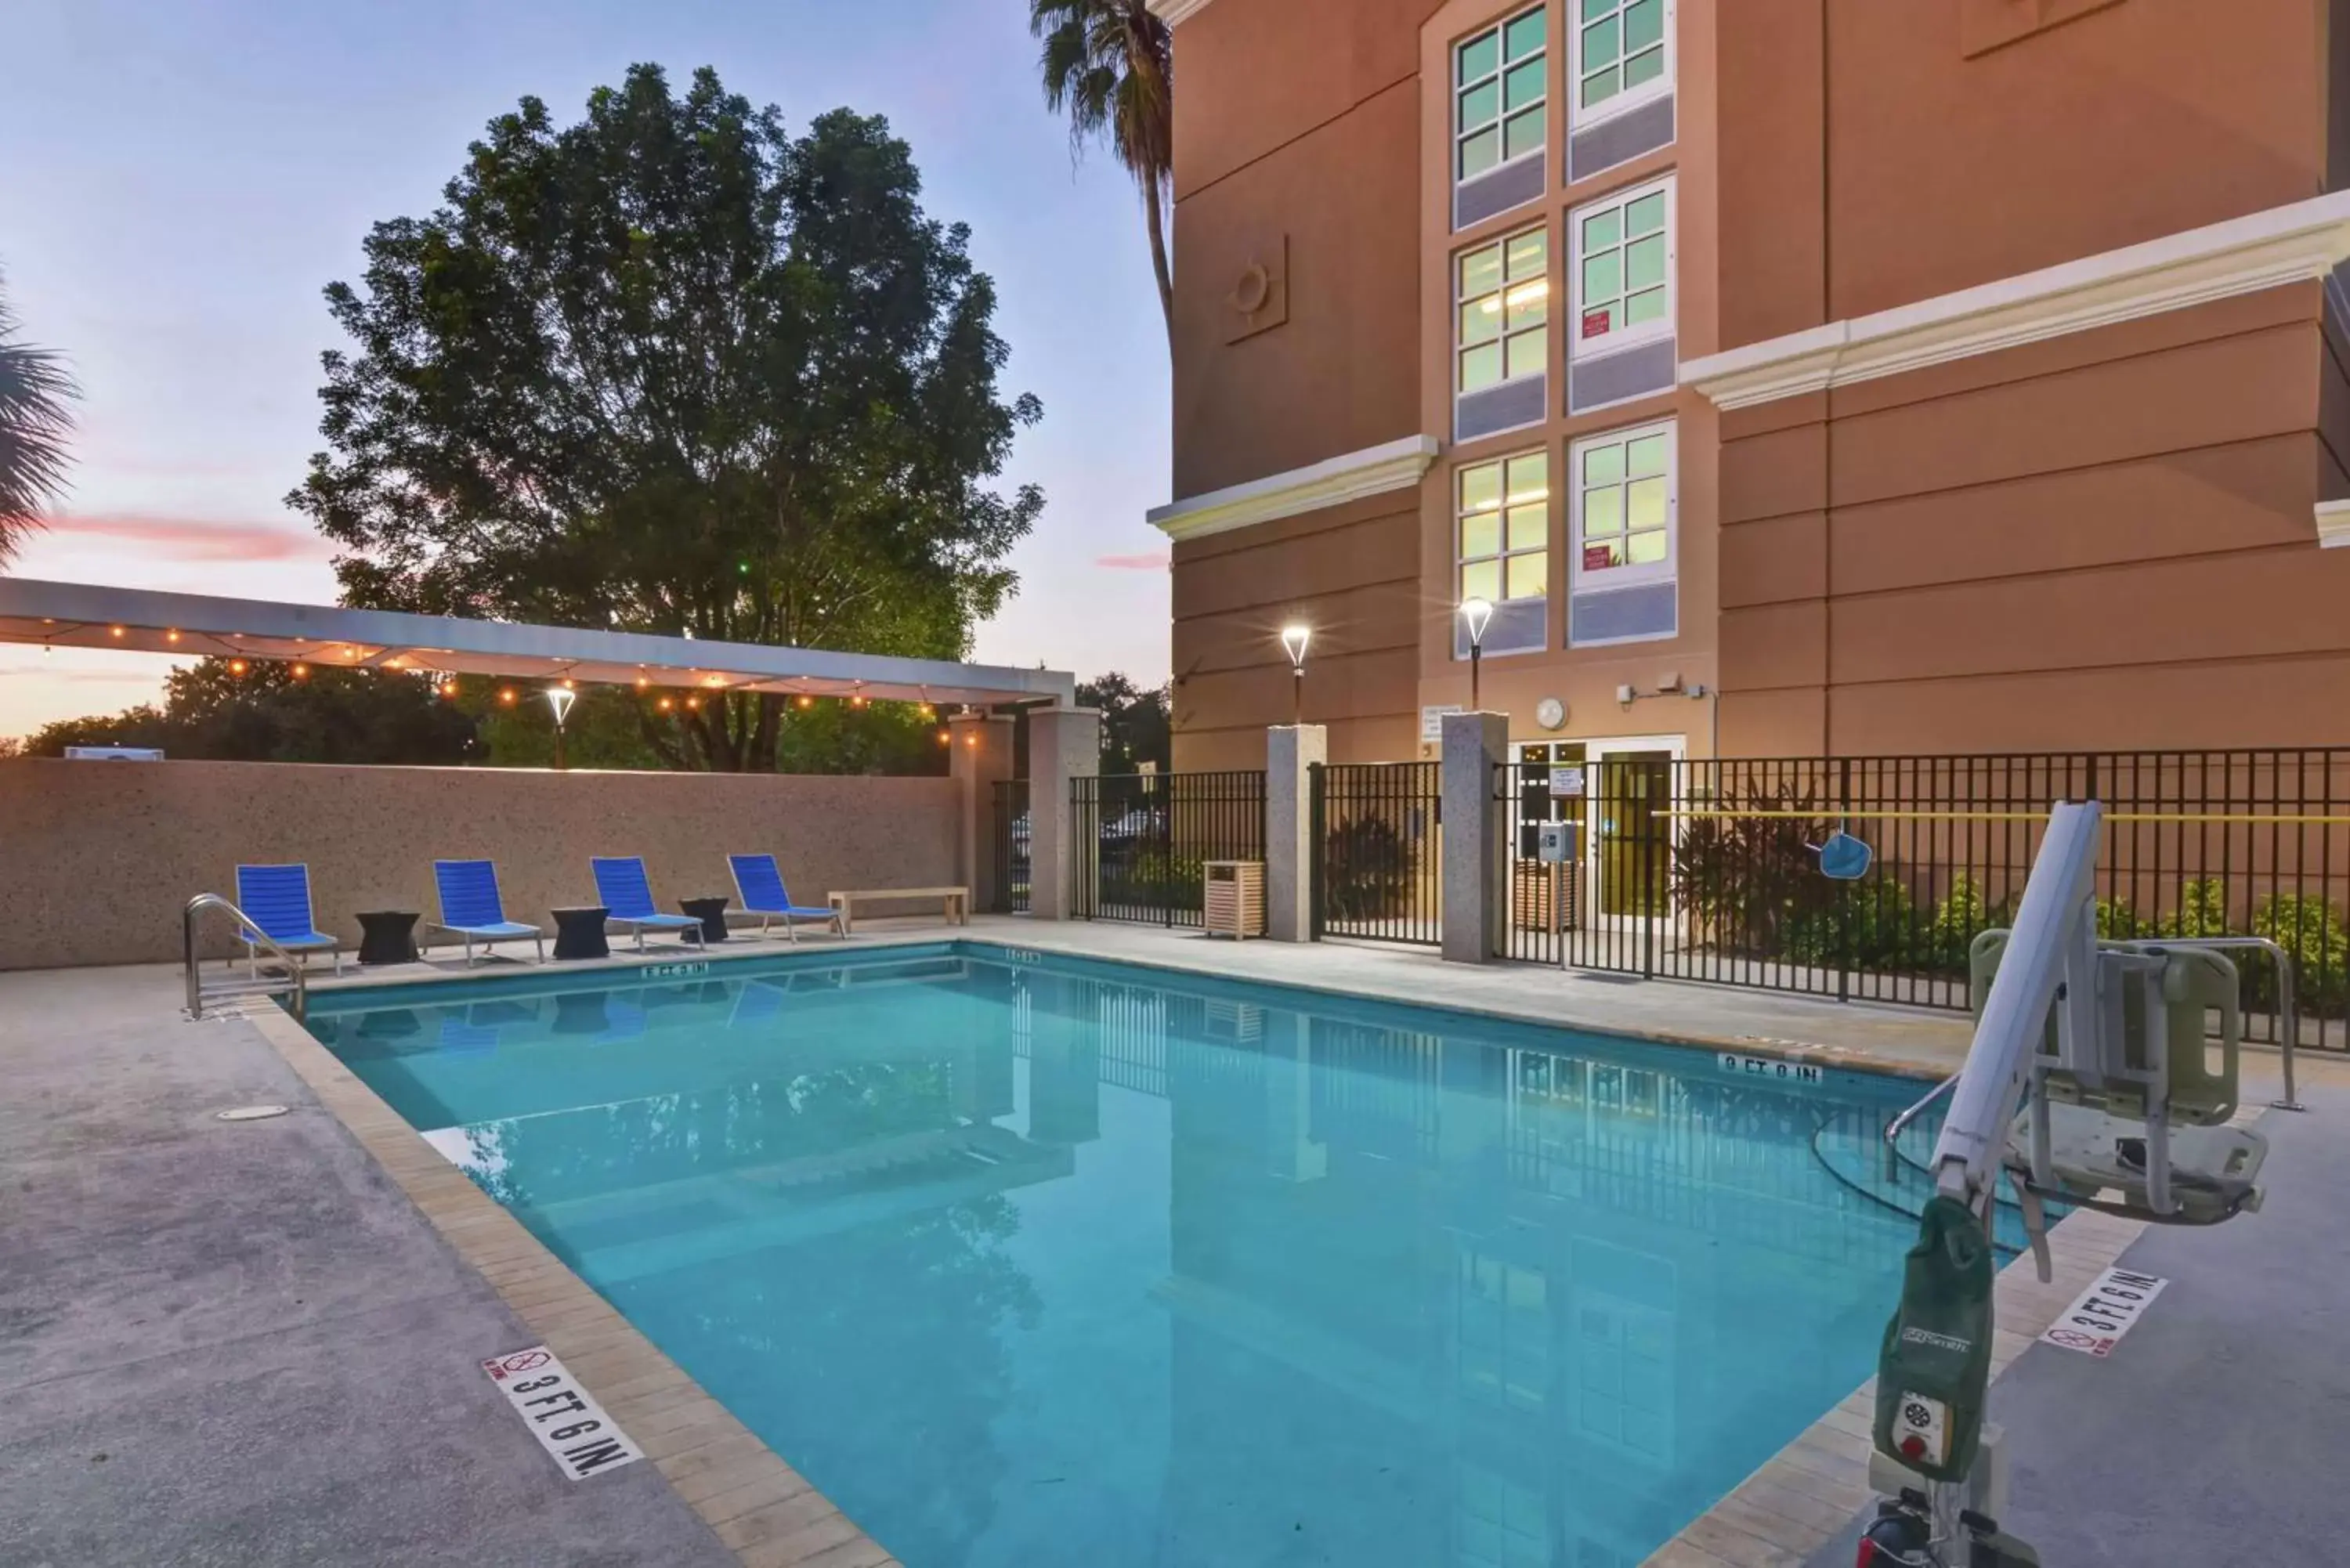 Swimming Pool in Home2 Suites by Hilton Miramar Ft. Lauderdale